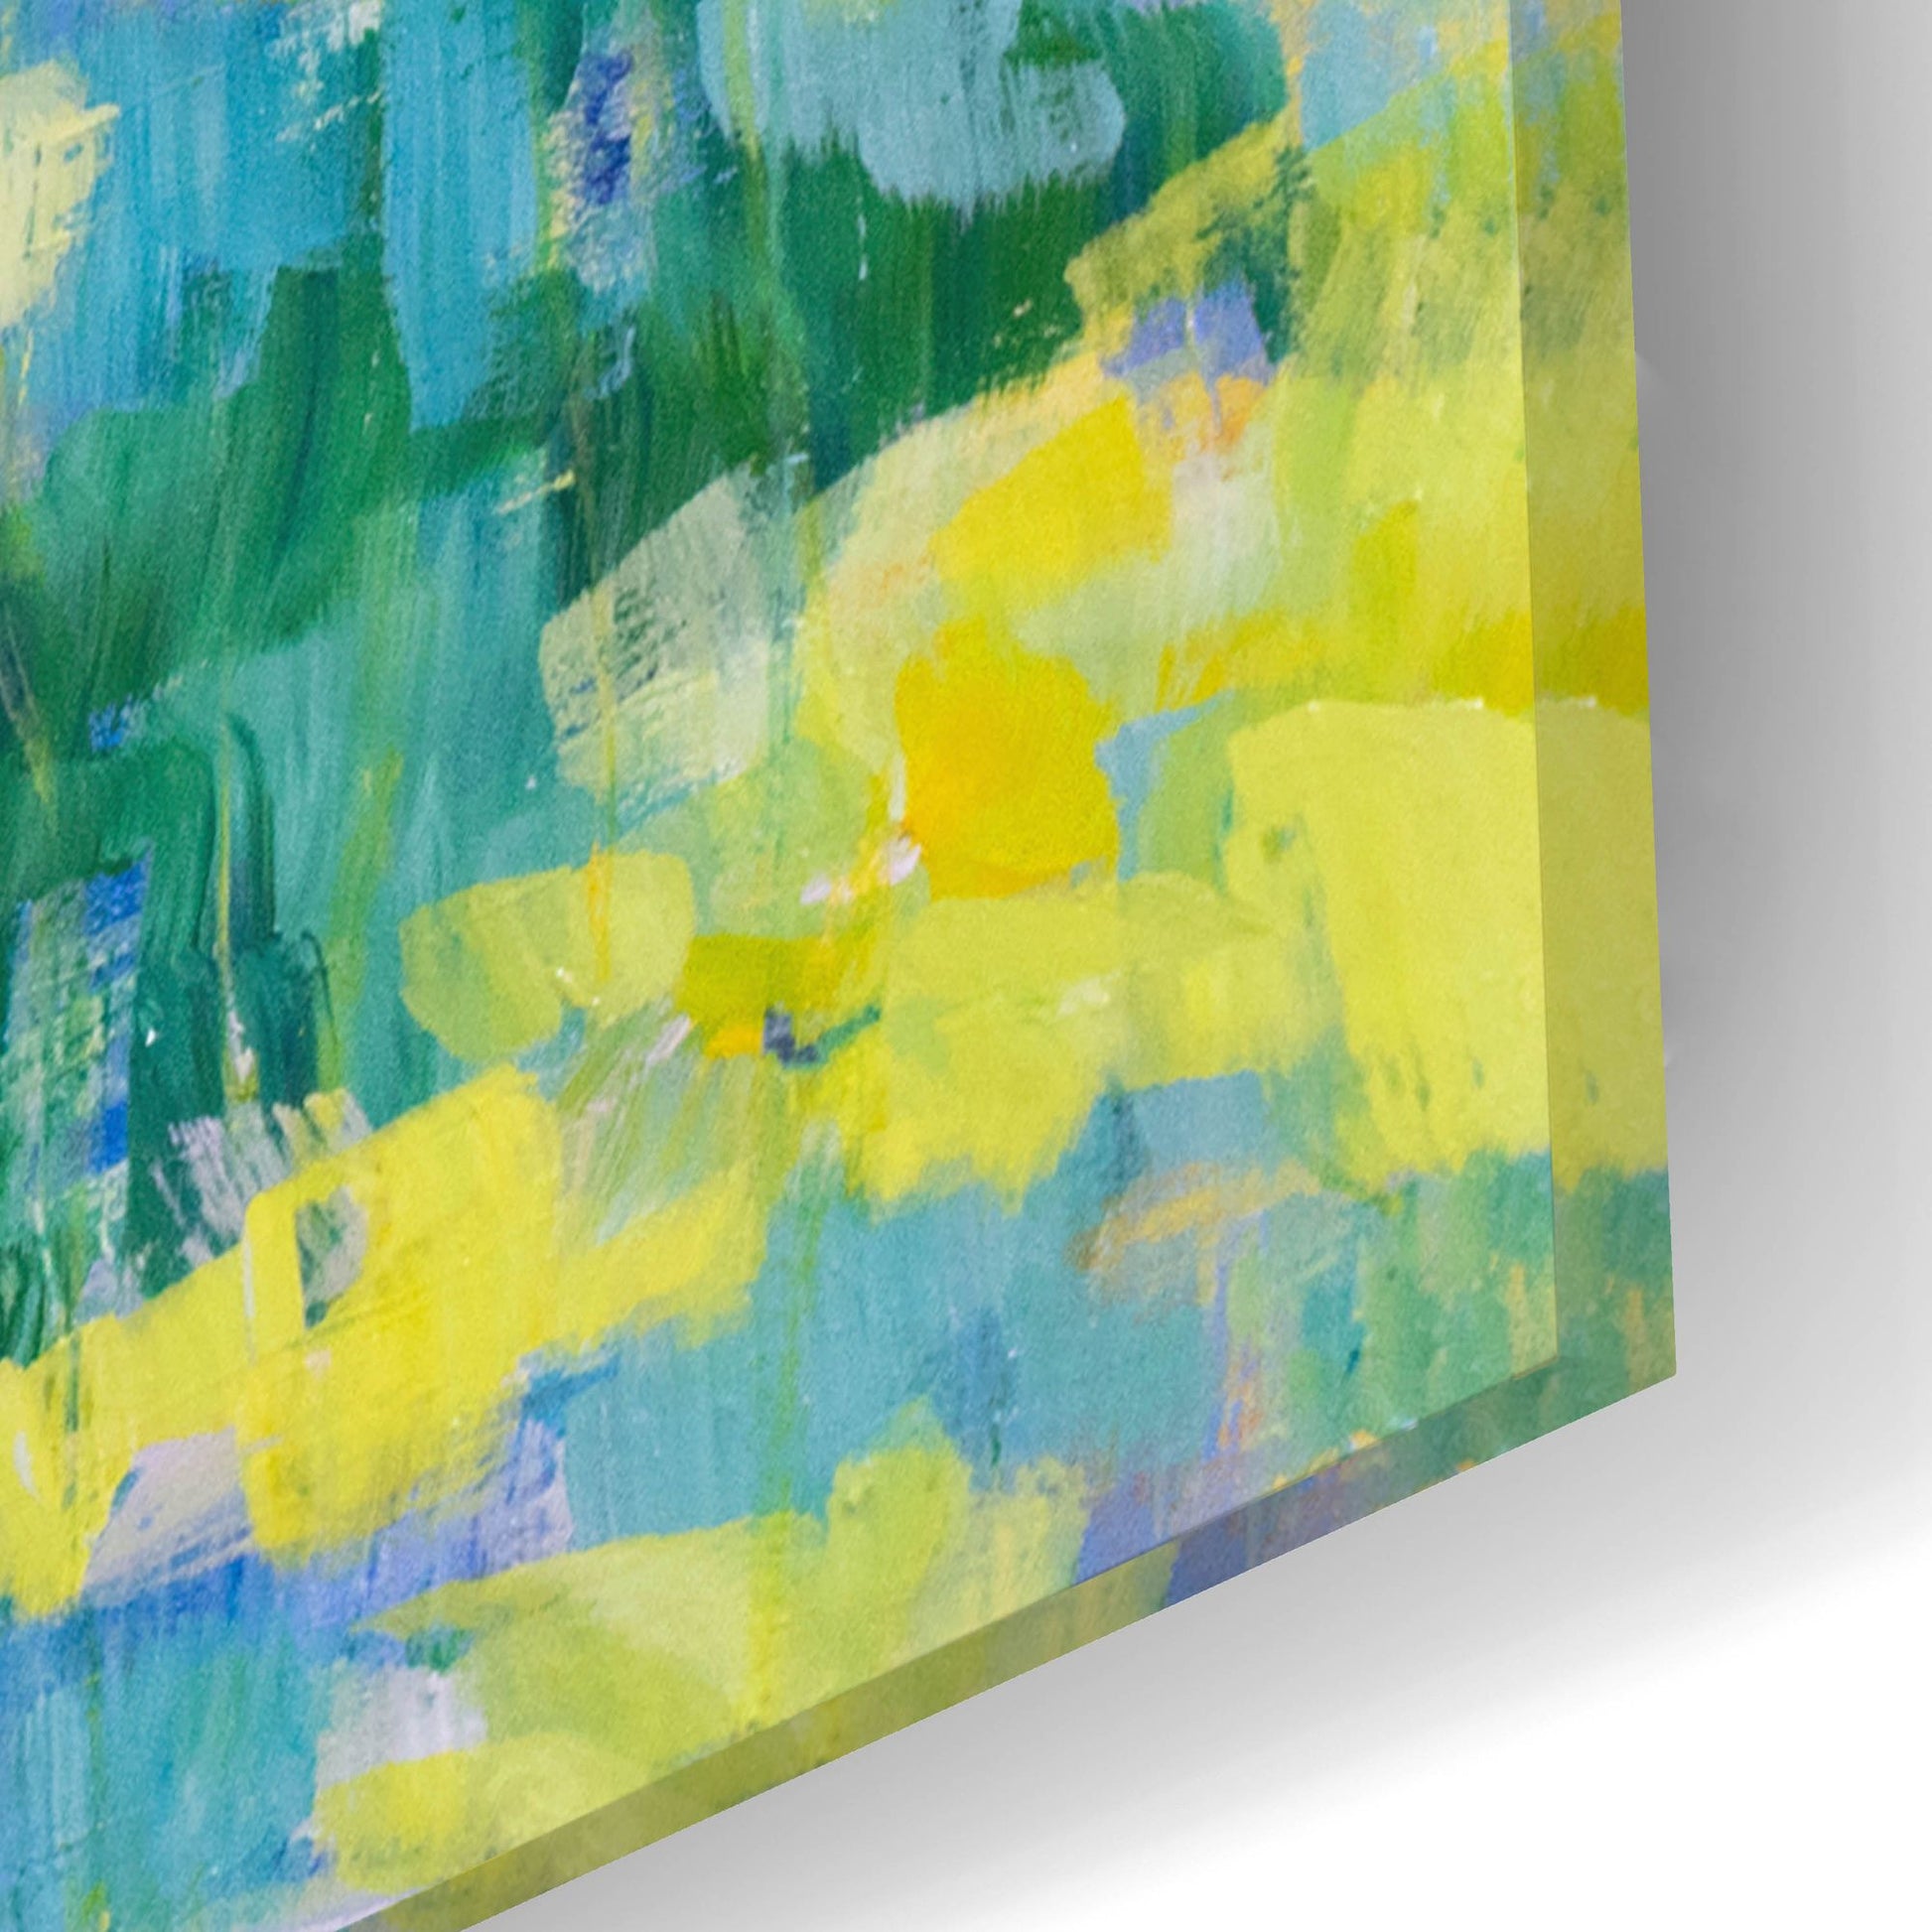 Epic Art 'And They Were All Yellow' by Cassandra Gillens, Acrylic Glass Wall Art,24x16